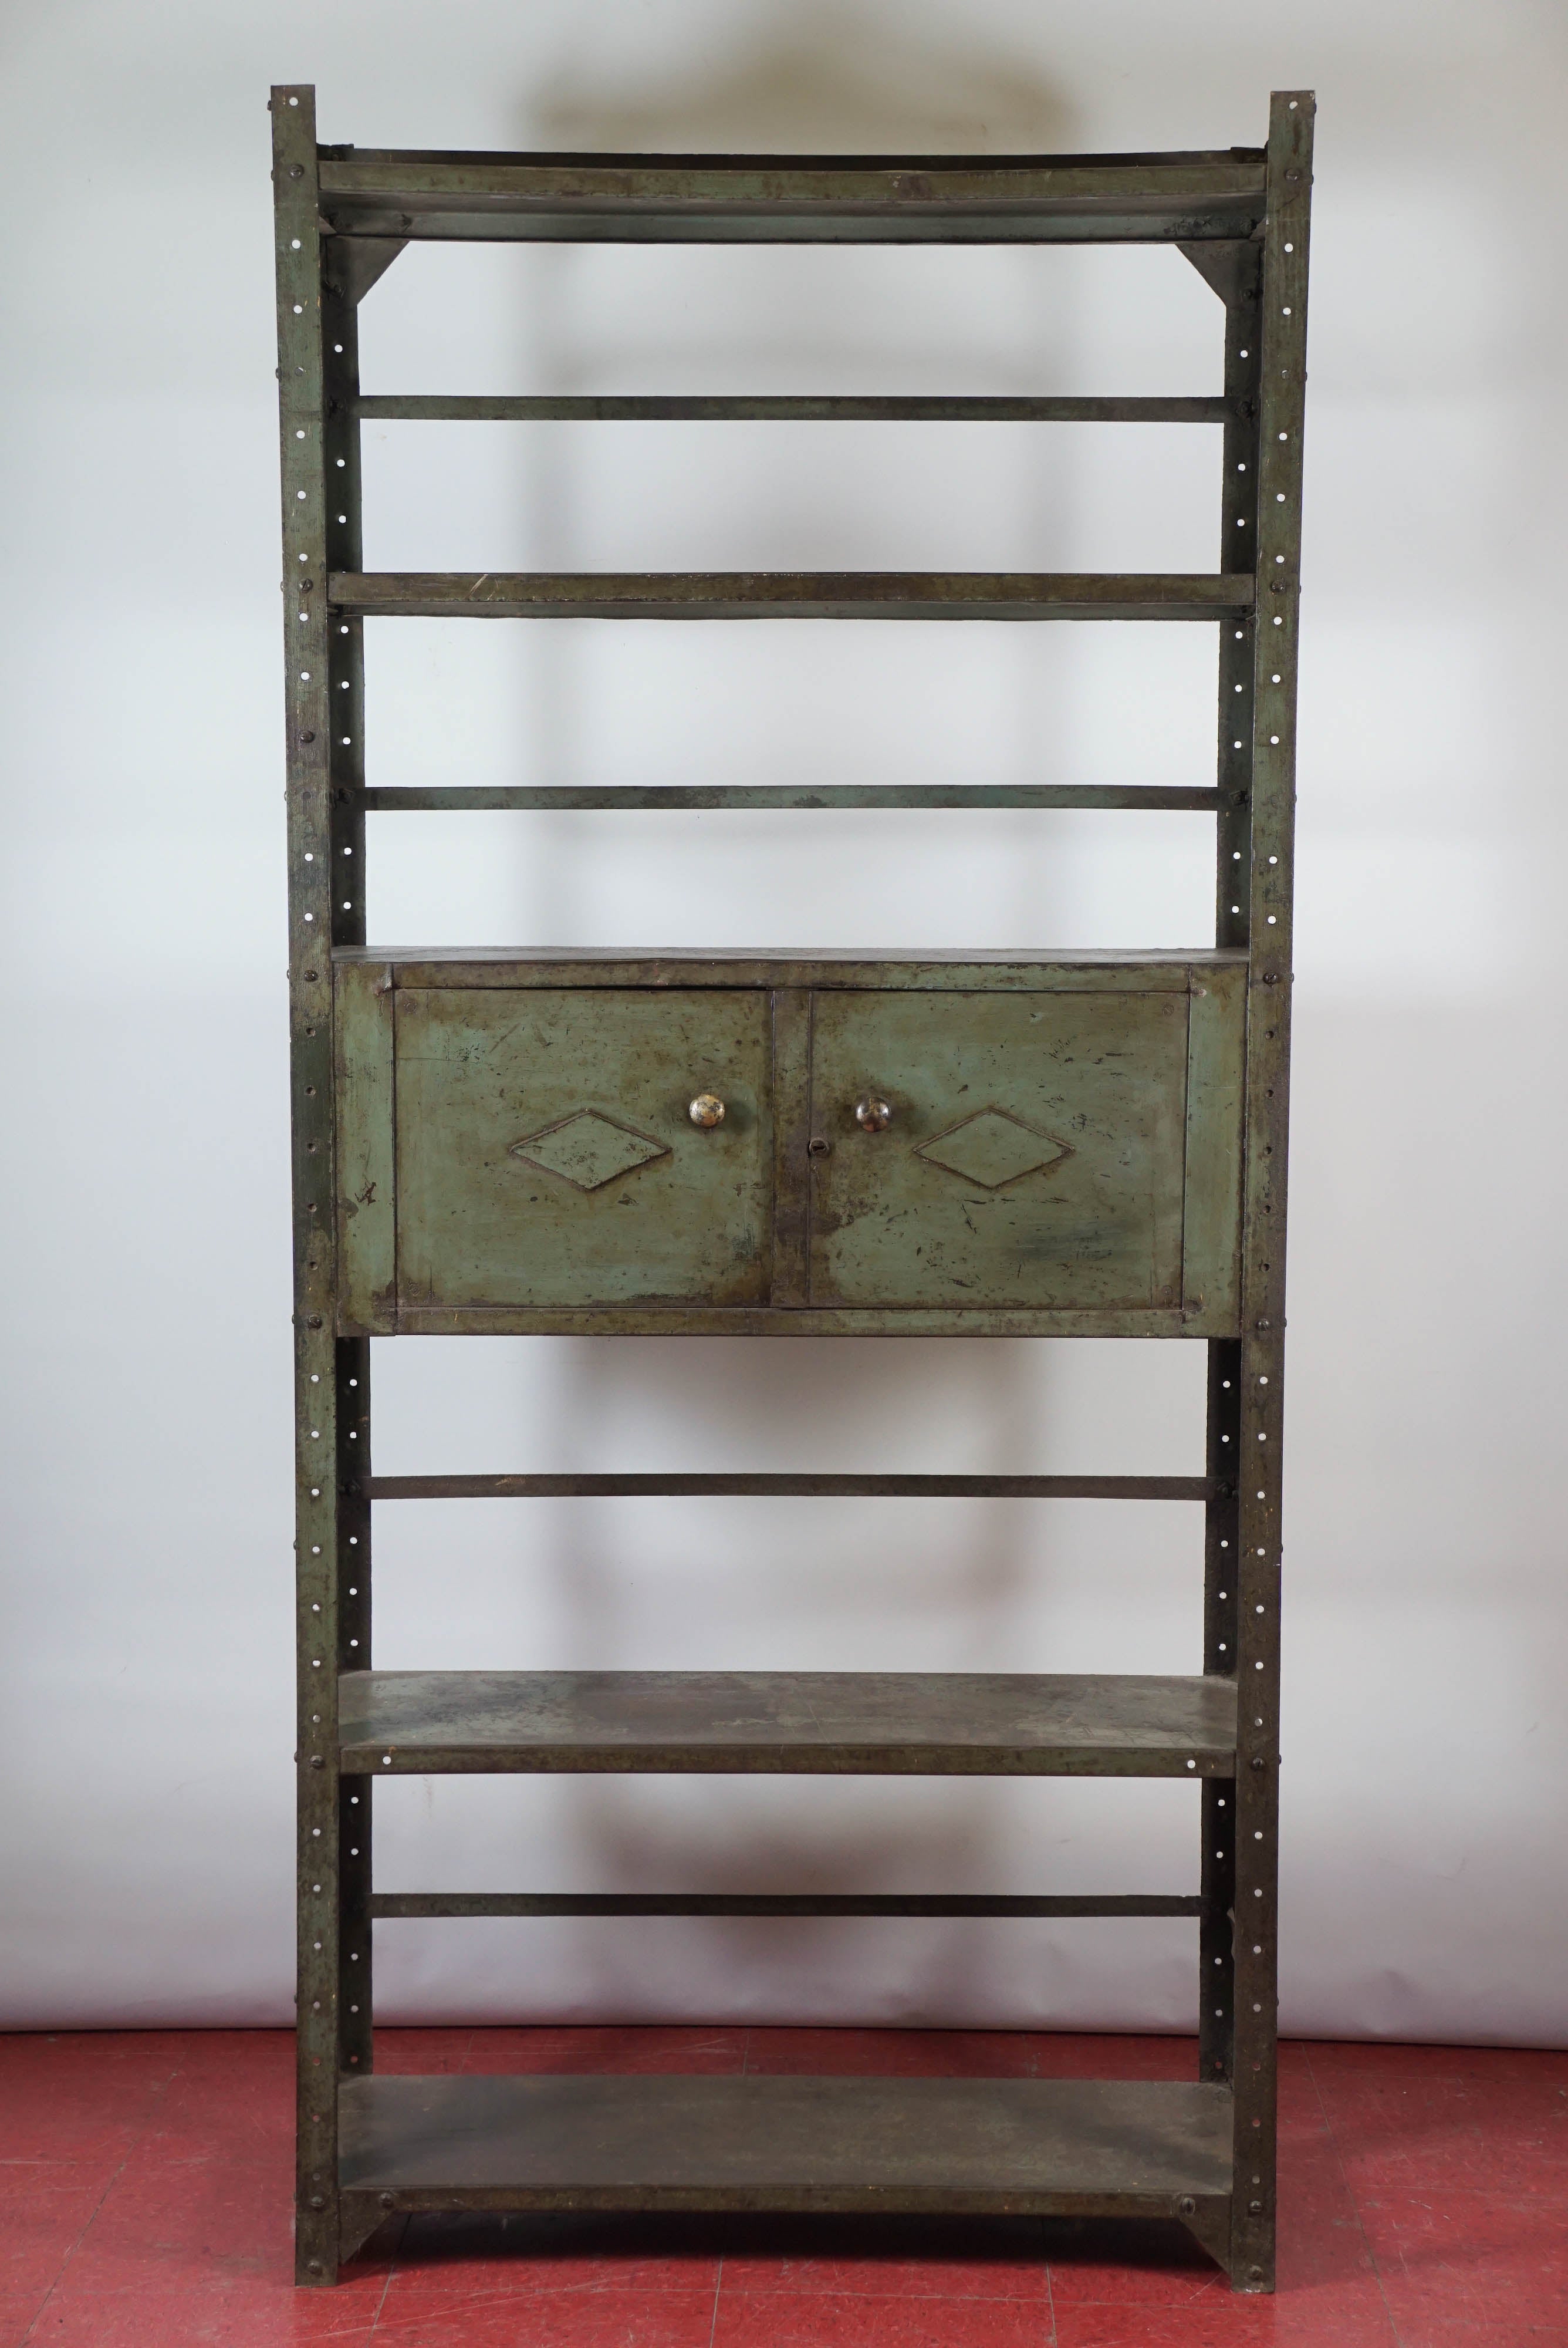 This industrial bookcase cabinet and or shelving unit consists of four to five shelves depending on height of ceiling where it will be placed plus center cabinet with double doors (magnetic closing) and braces across the back and sides compose this